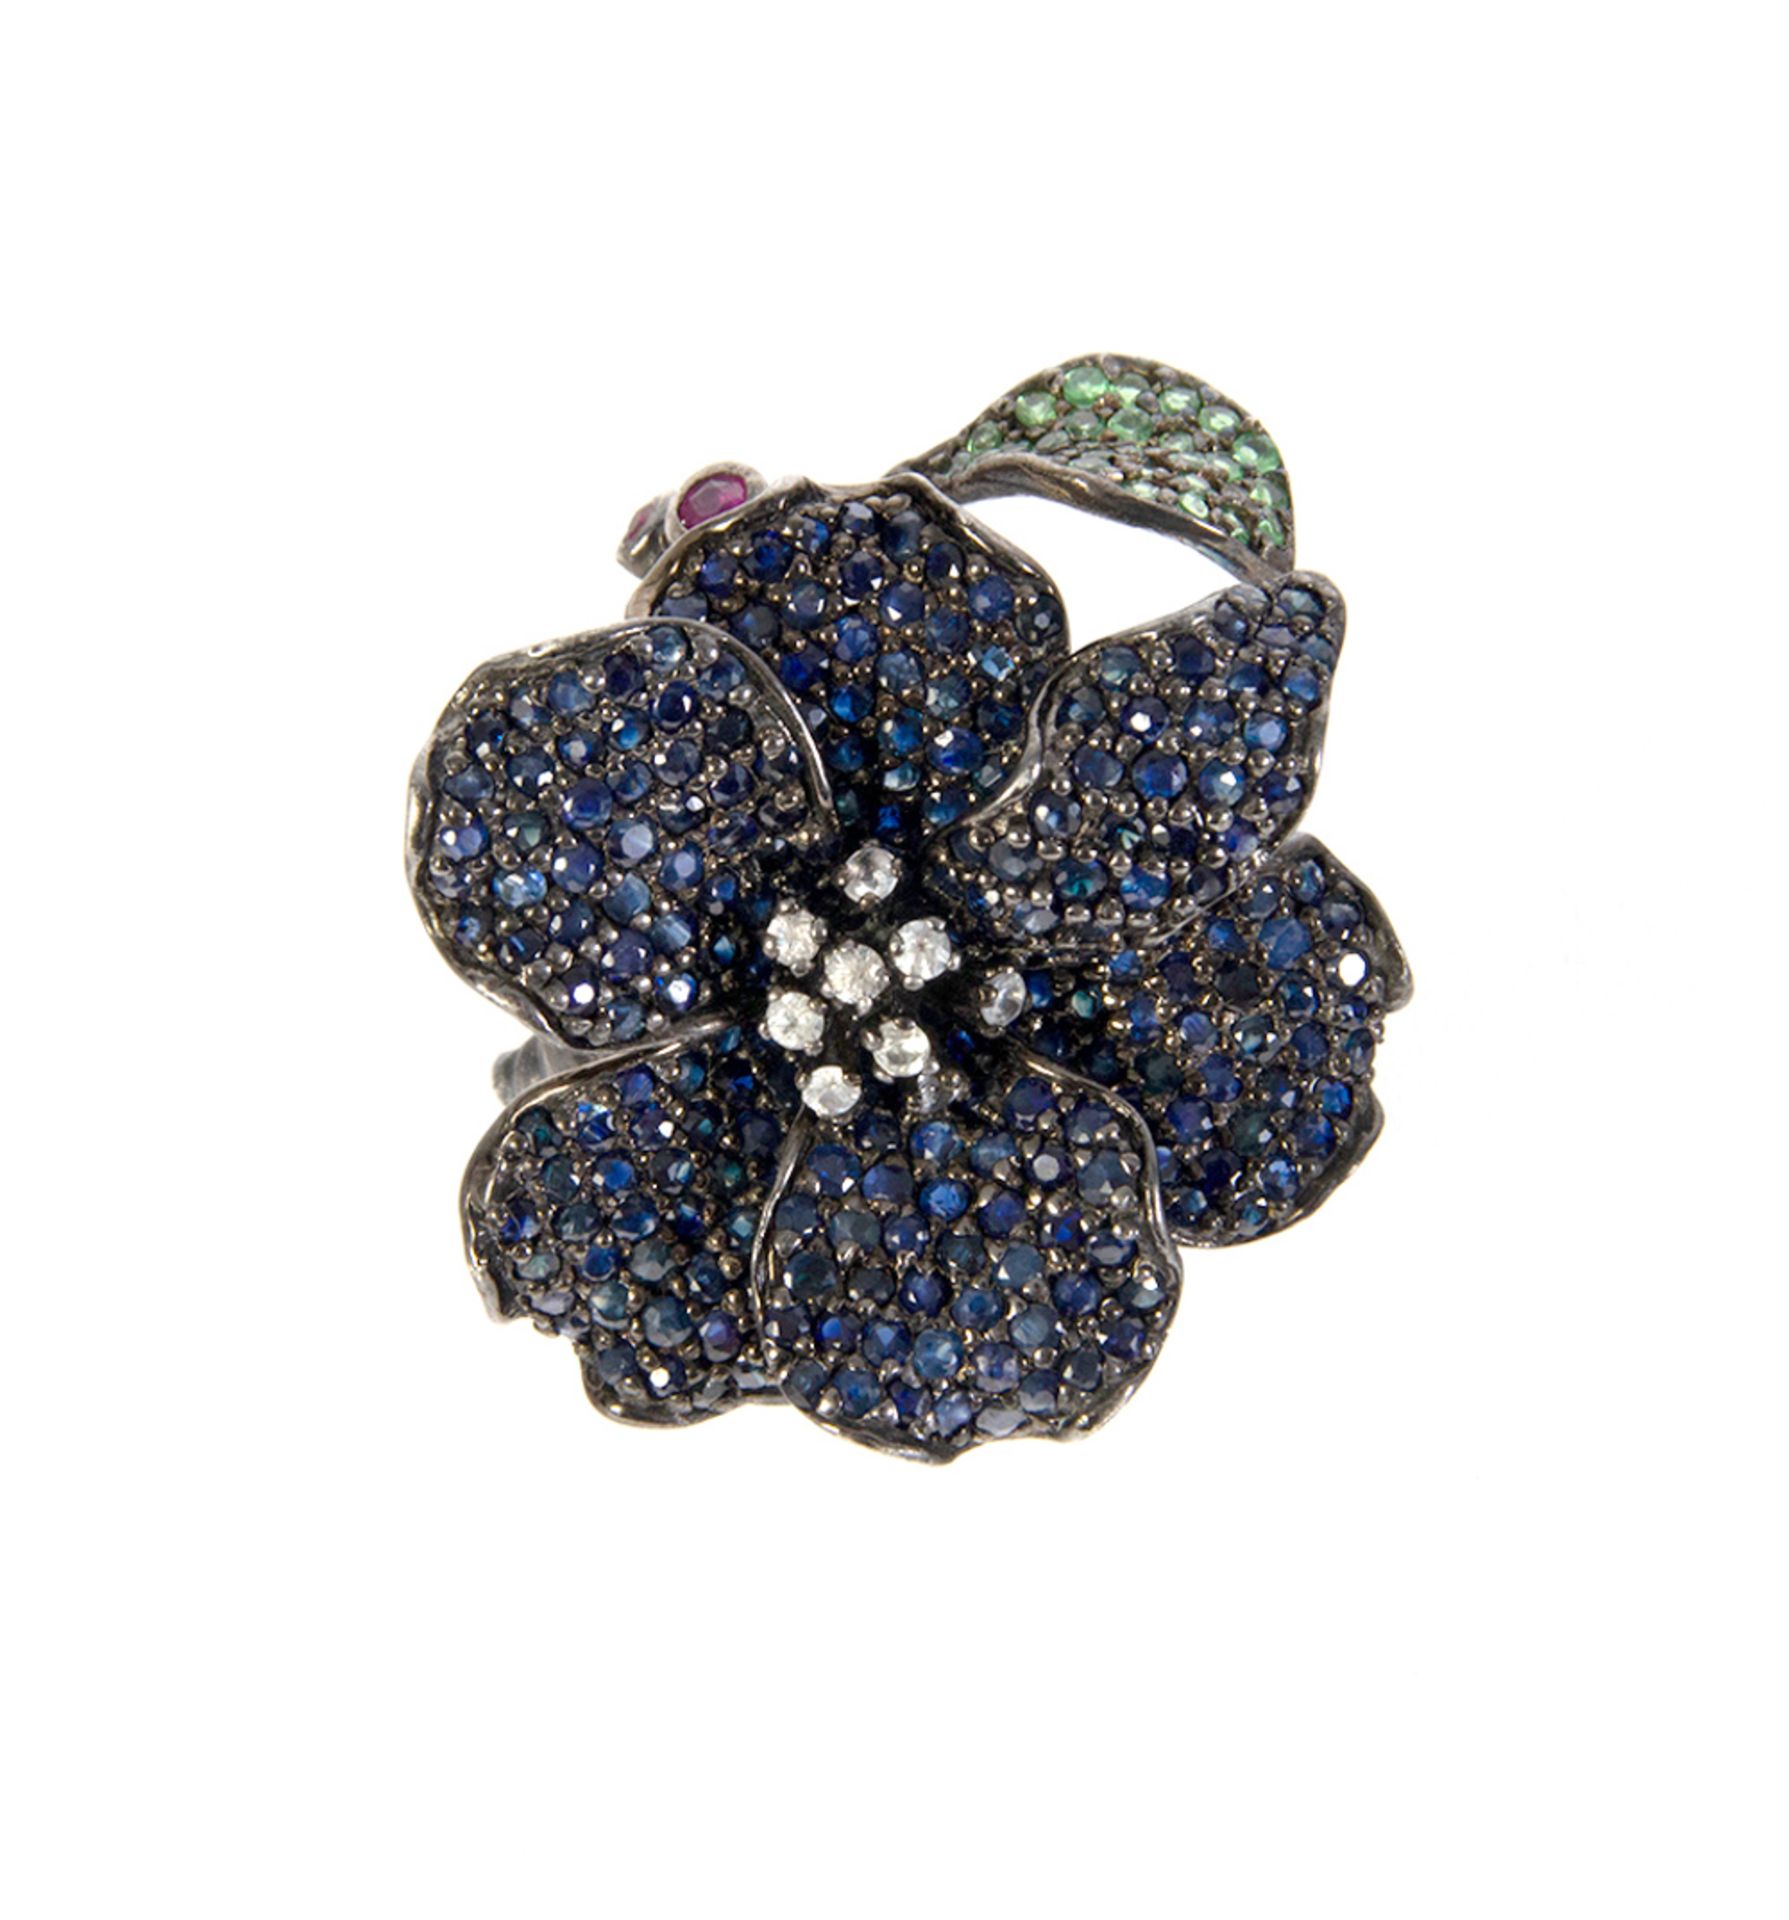 Flower ring in silver and blue sapphires, green garnets, rubies and zircons, round cut.